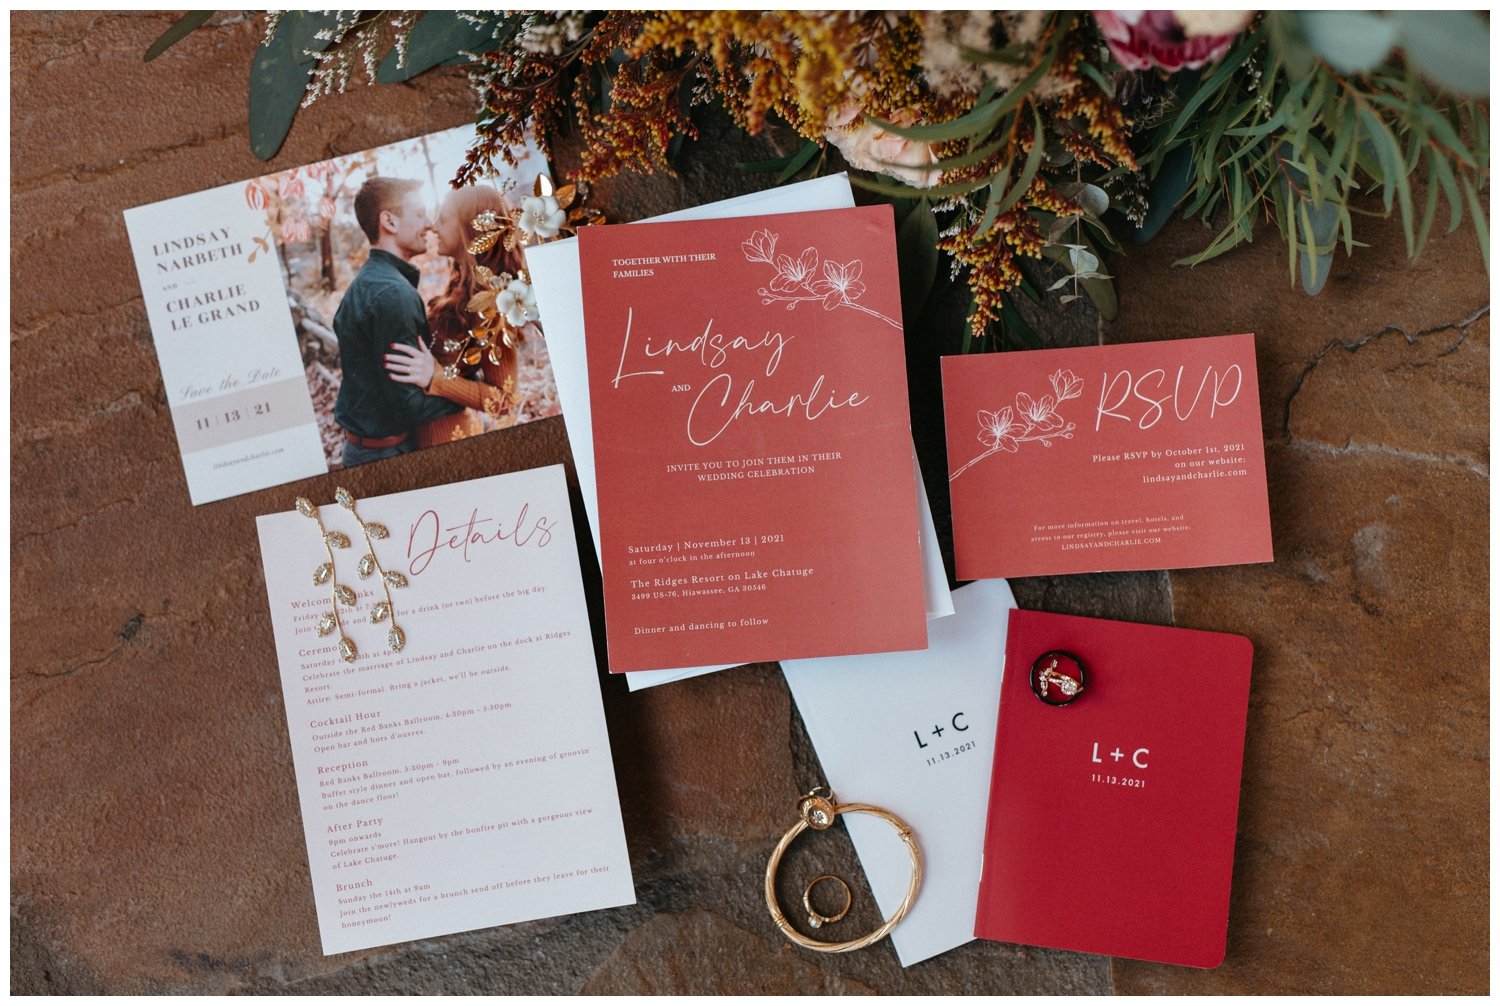 Florals and an invitation to a mountain wedding venue